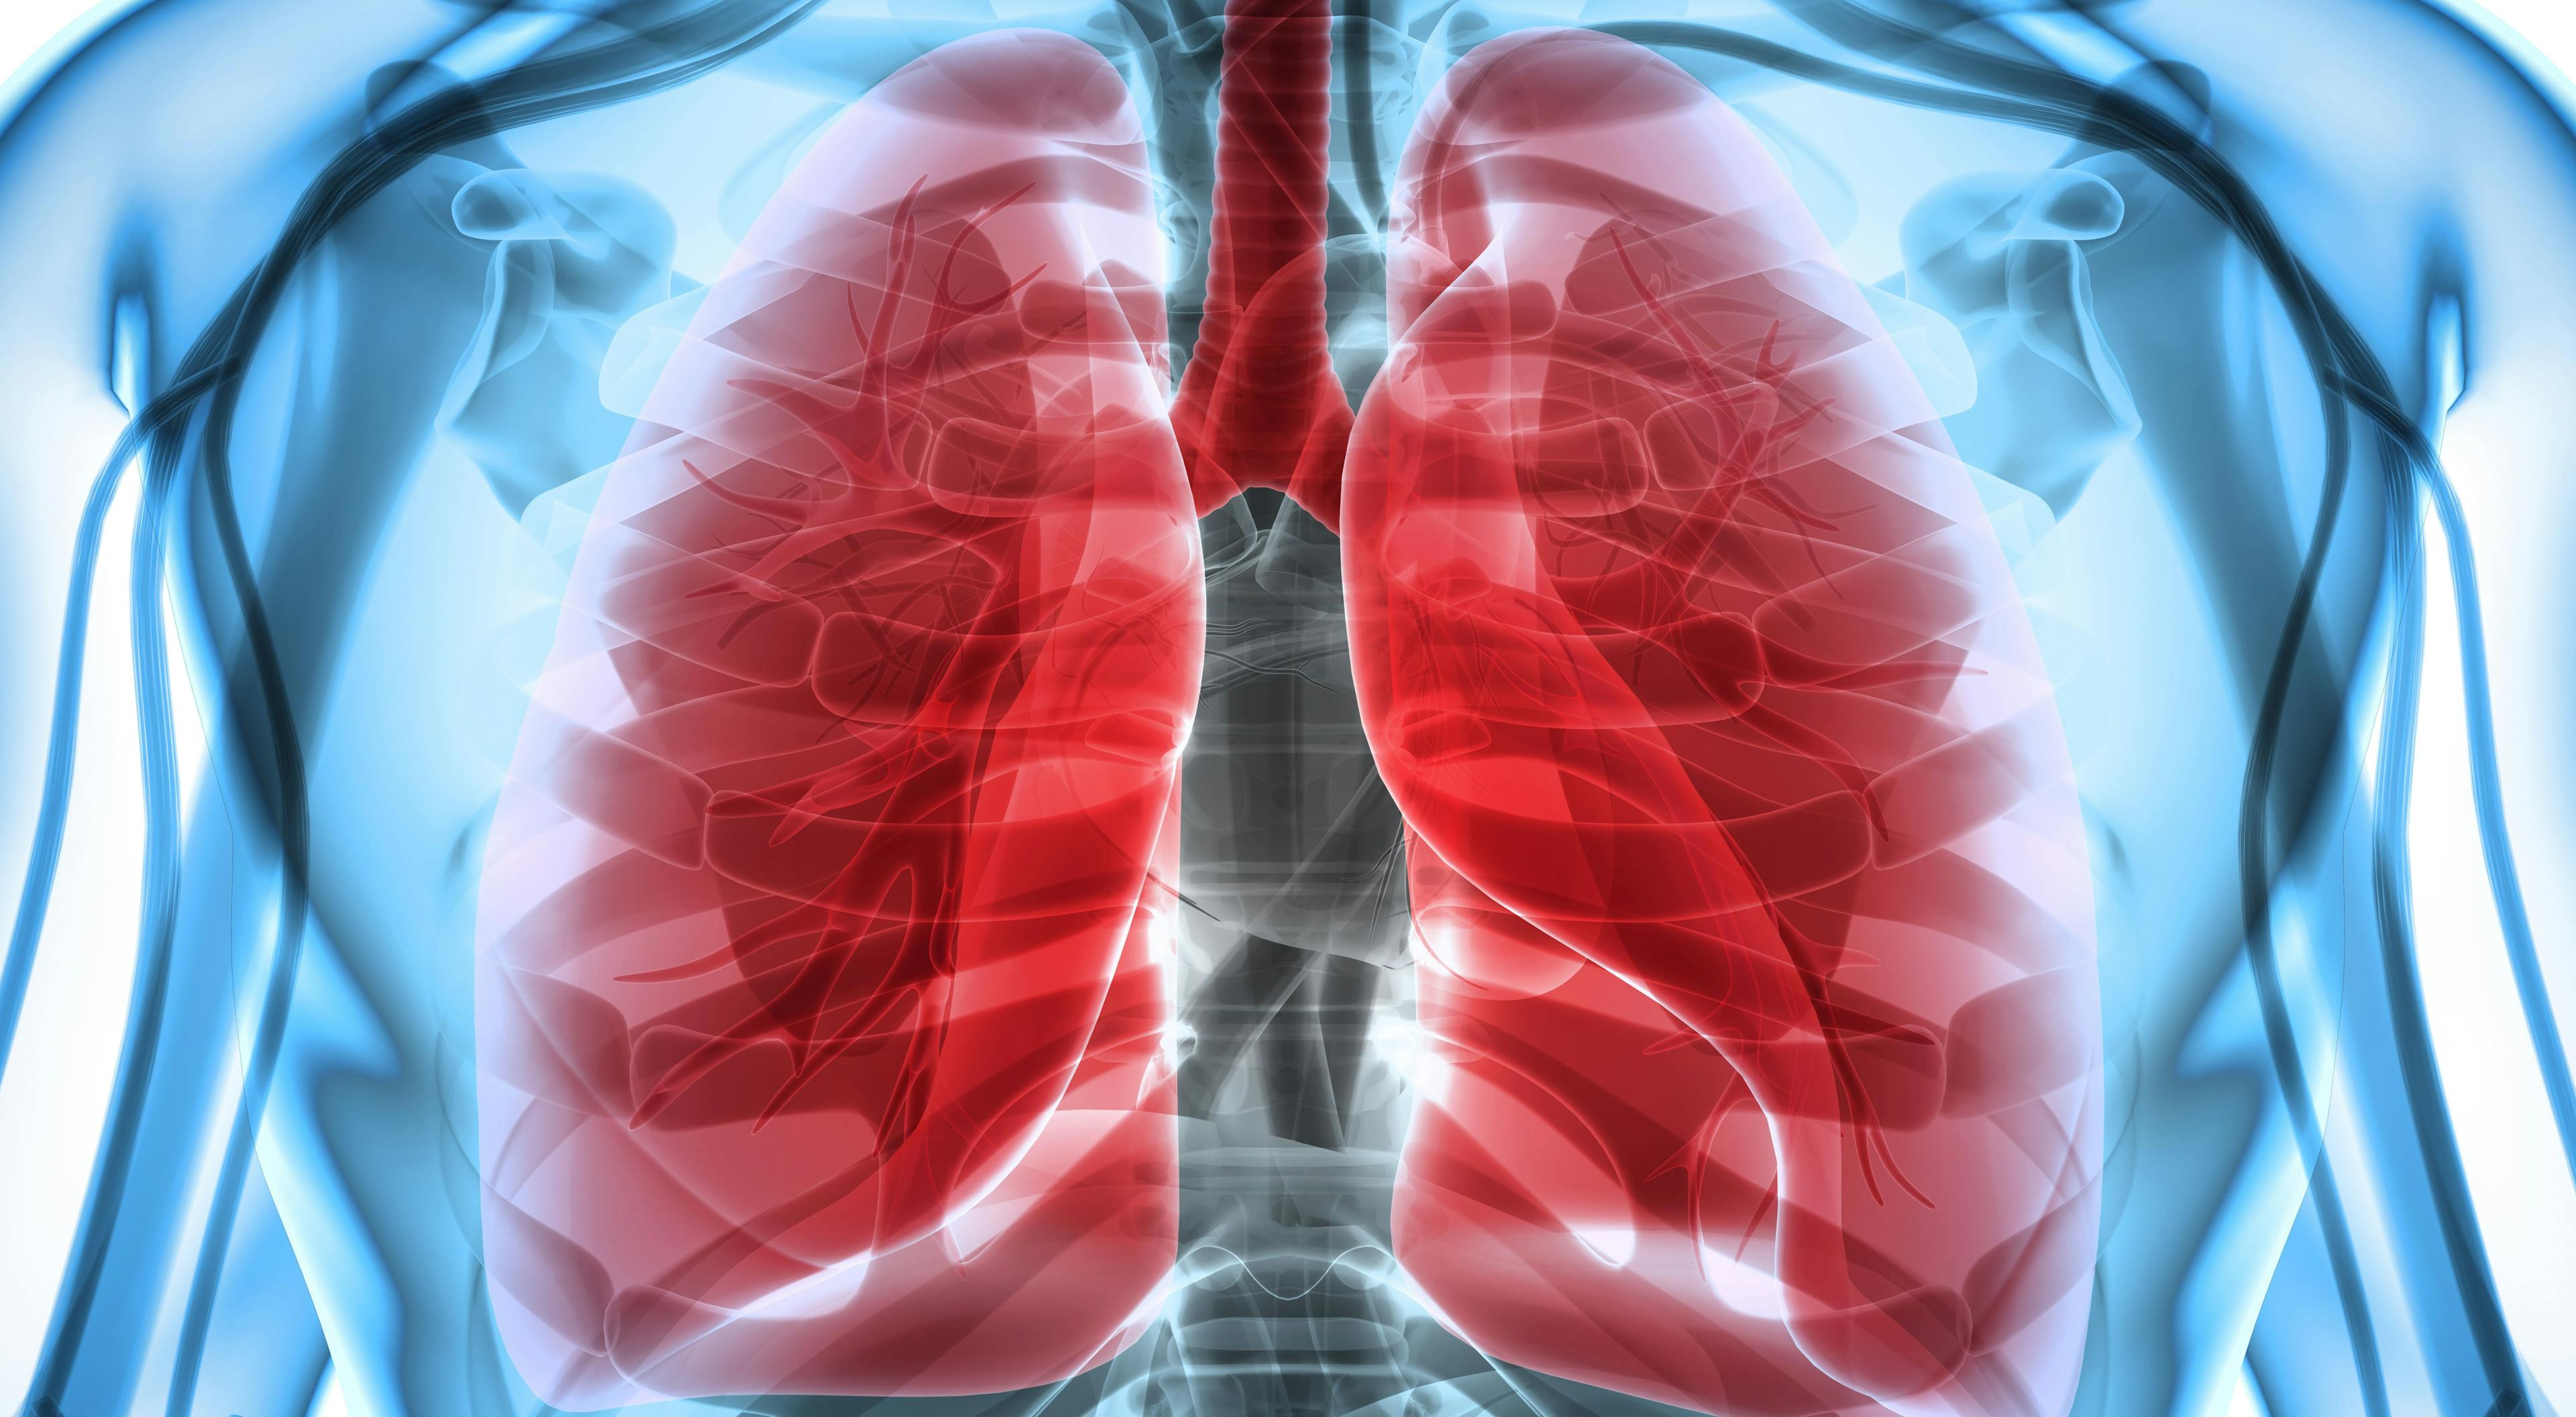 Immunotherapy Provides Long-Awaited Progress in Small Cell Lung Cancer